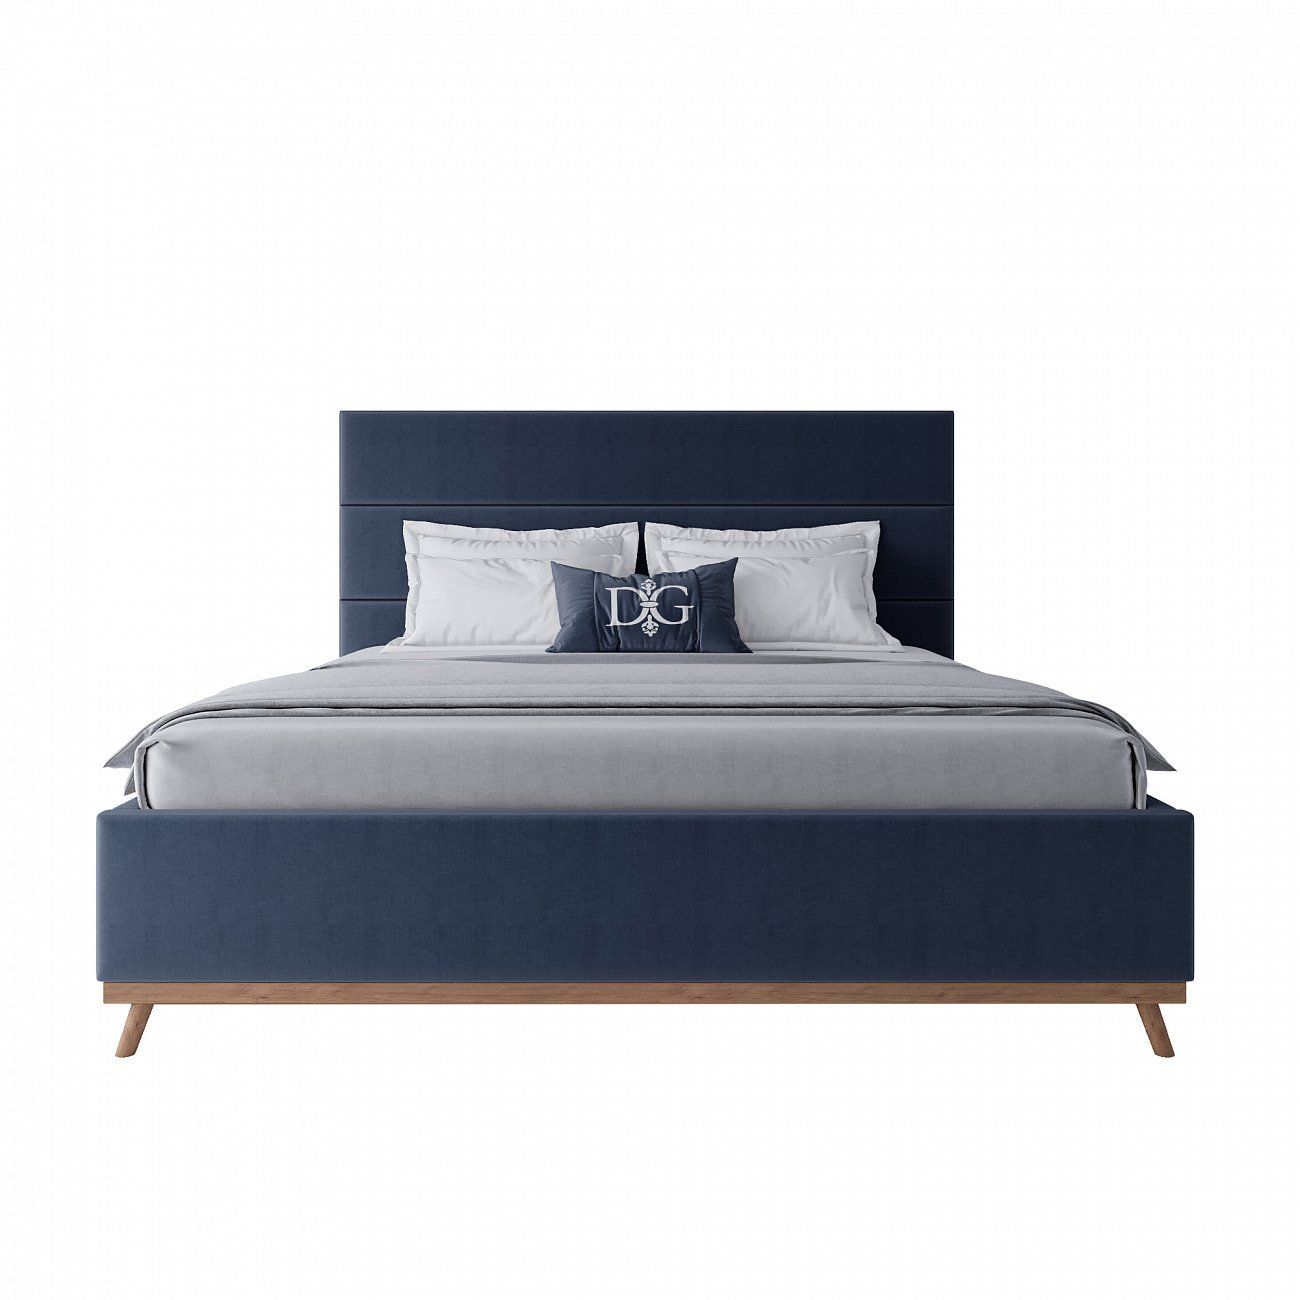 Double bed 180x200 cm blue Cooper Blueberry